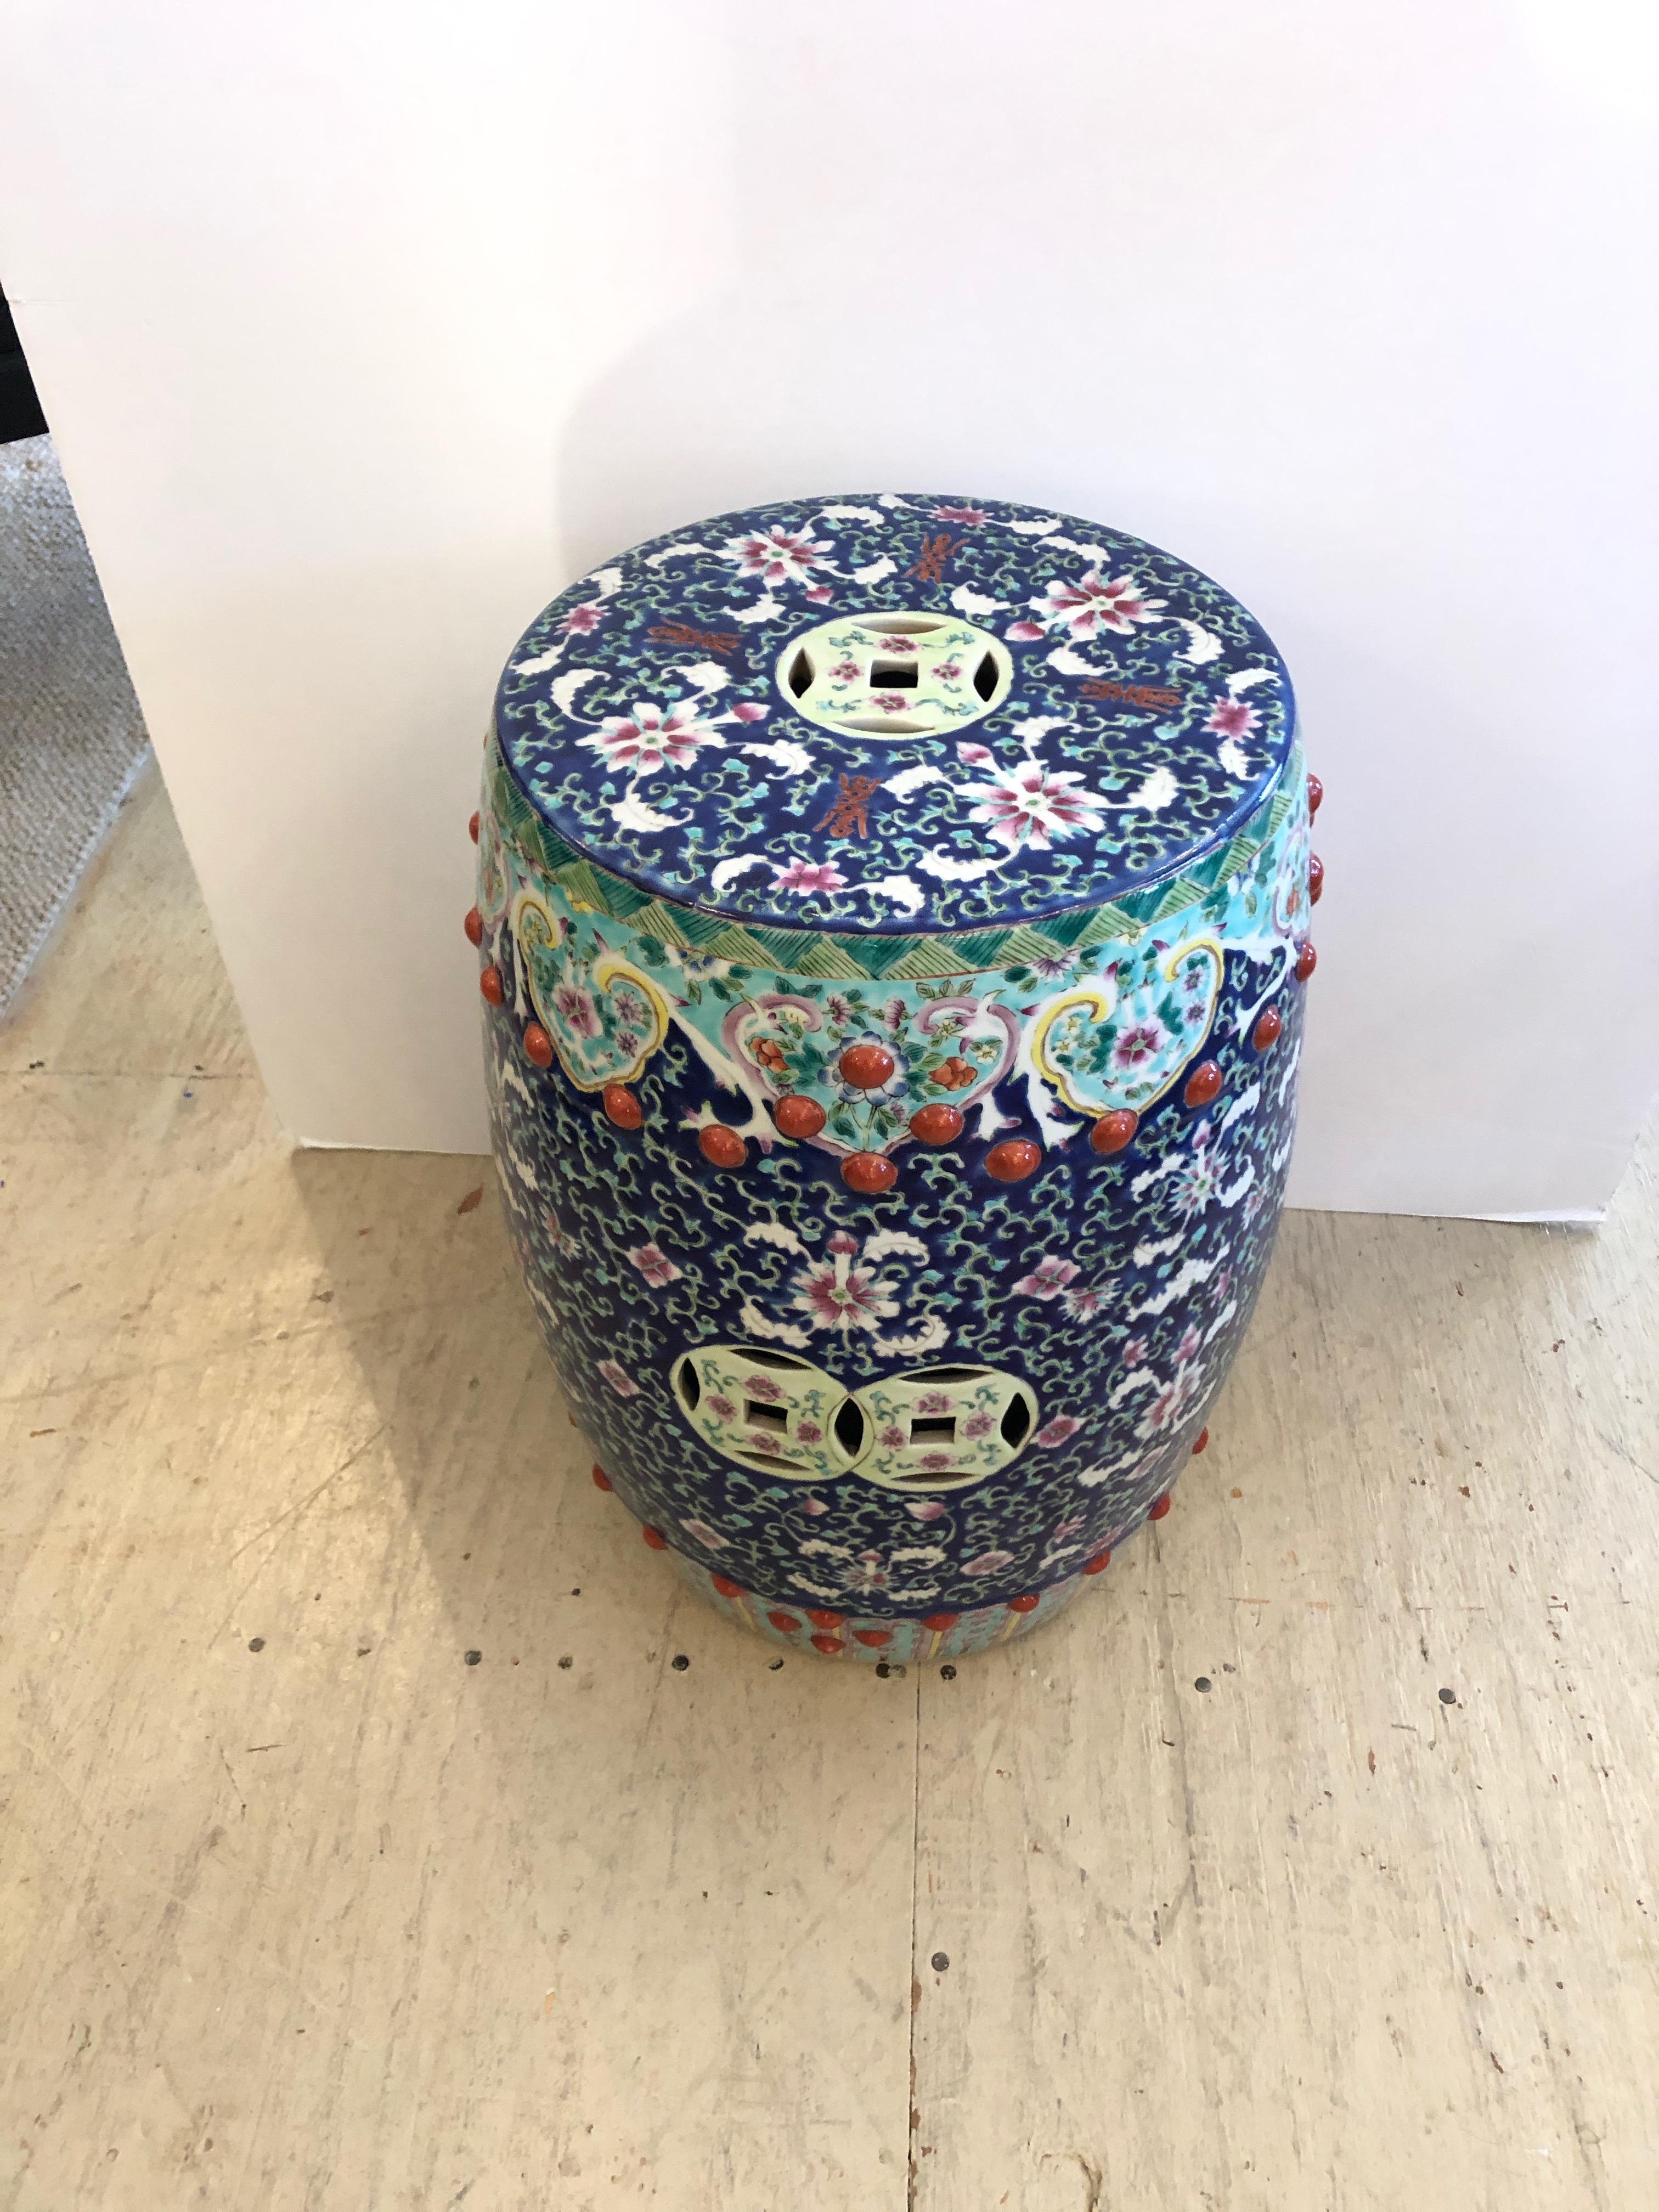 A magnificent intricately detailed ceramic garden seat having a melange of colors including navy blue, white, turquoise, pink and Chinese red. Makes a wonderful side or occasional table.